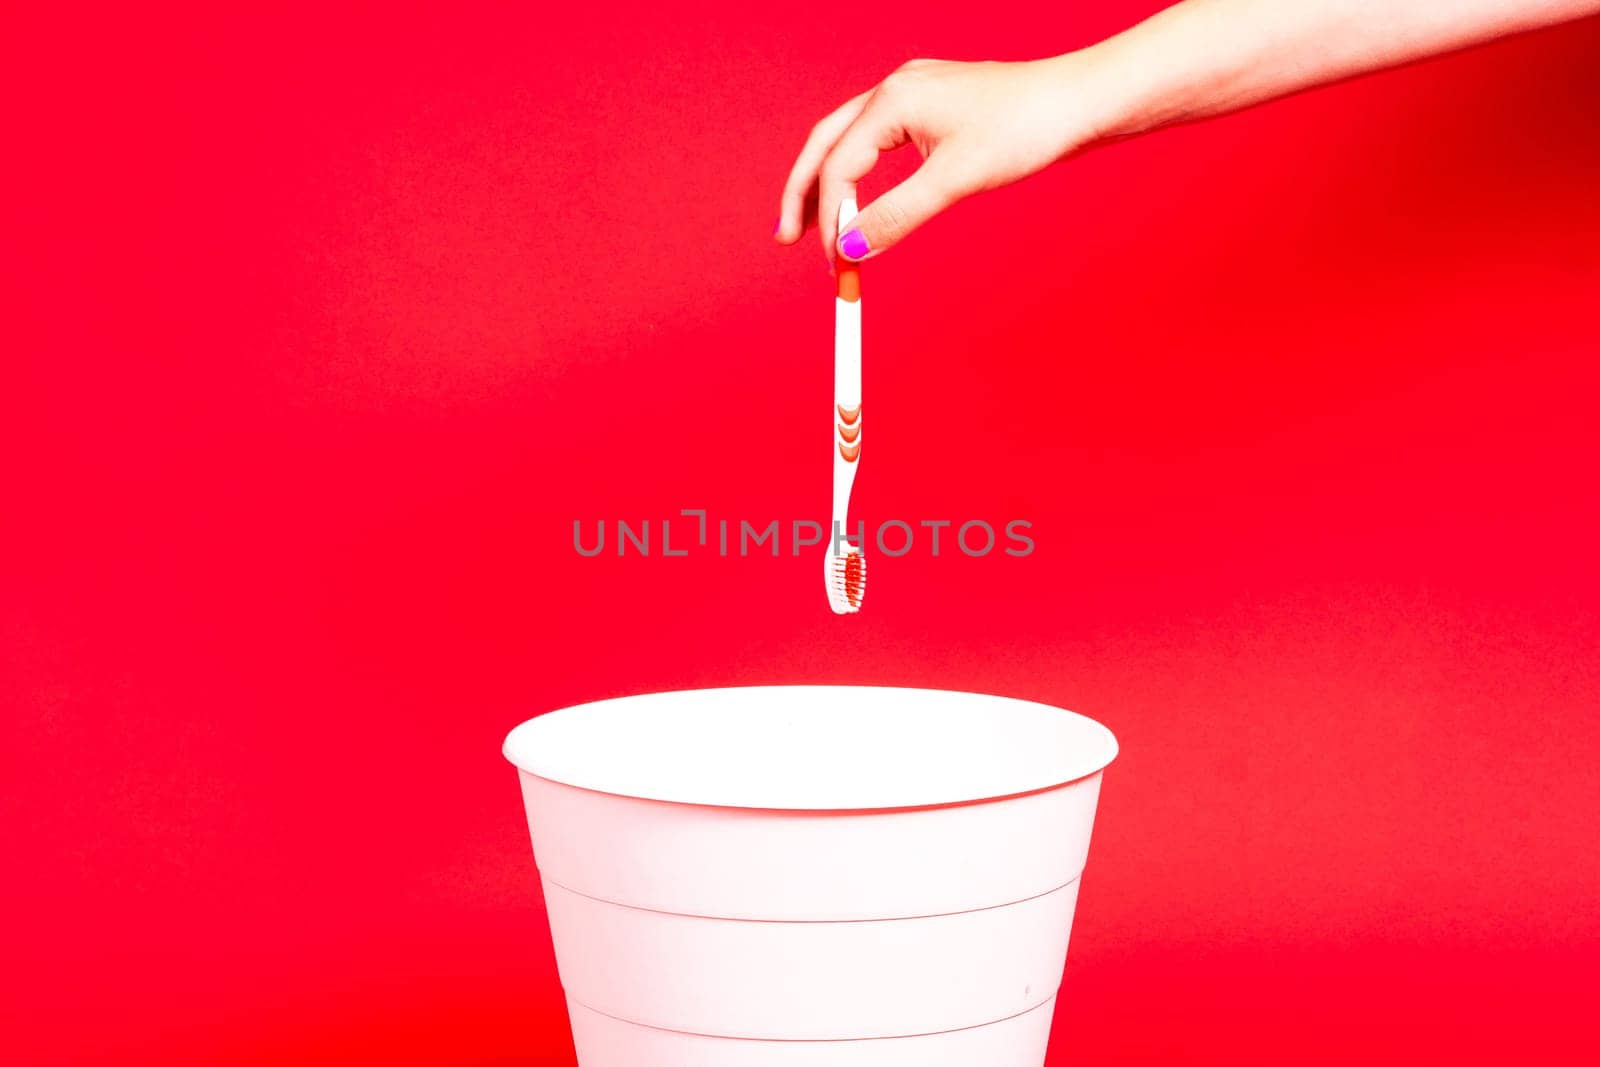 The toothbrush is thrown into a trash basket. Red background, copy space.